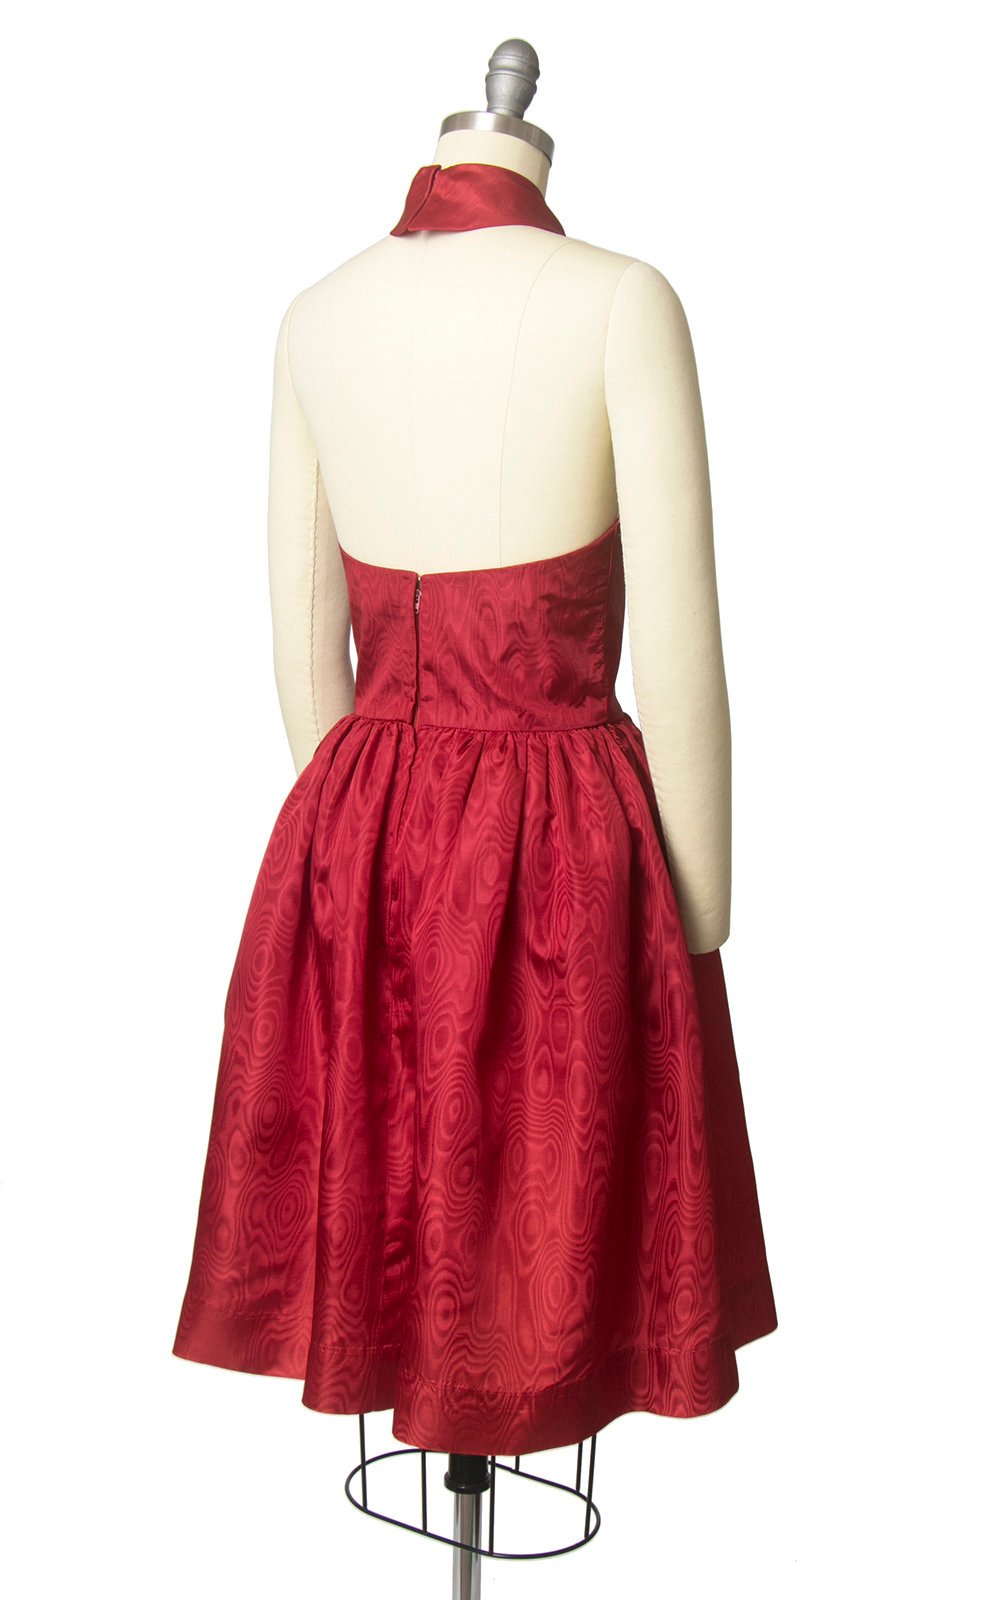 Vintage 1960s Dress | 60s Red Satin Halter Bow Open Back Full Skirt Party Dress with Pockets (x-small)